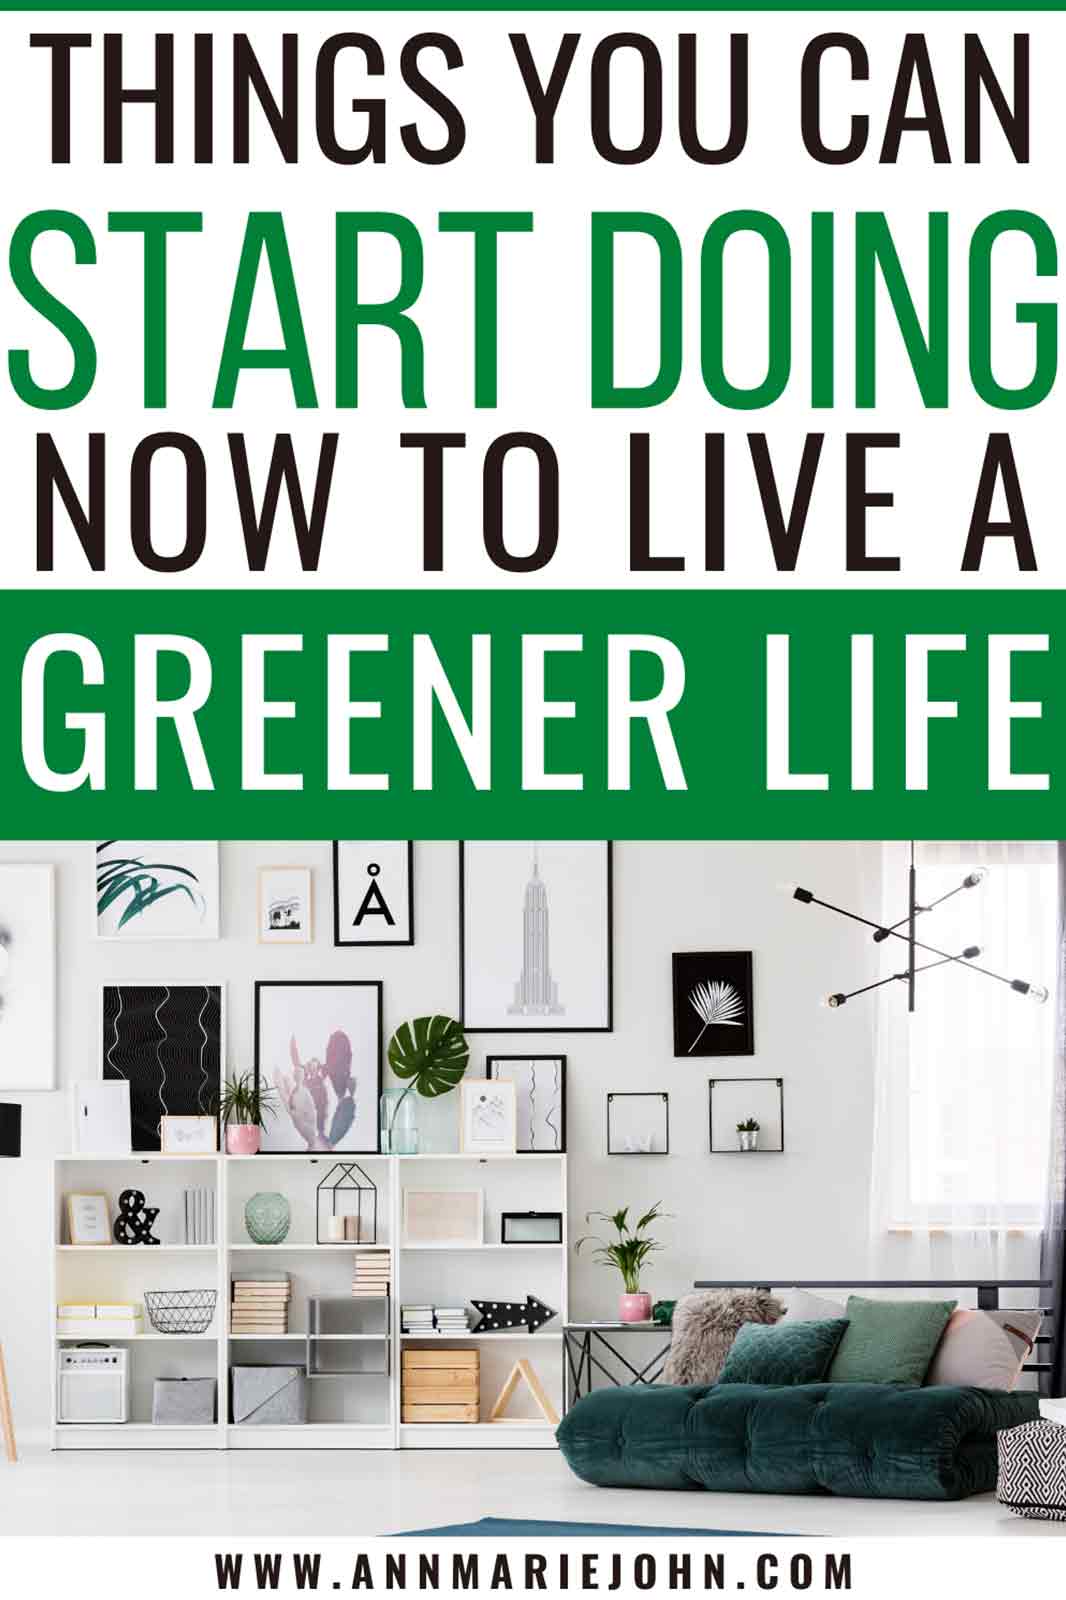 how to live a greener life